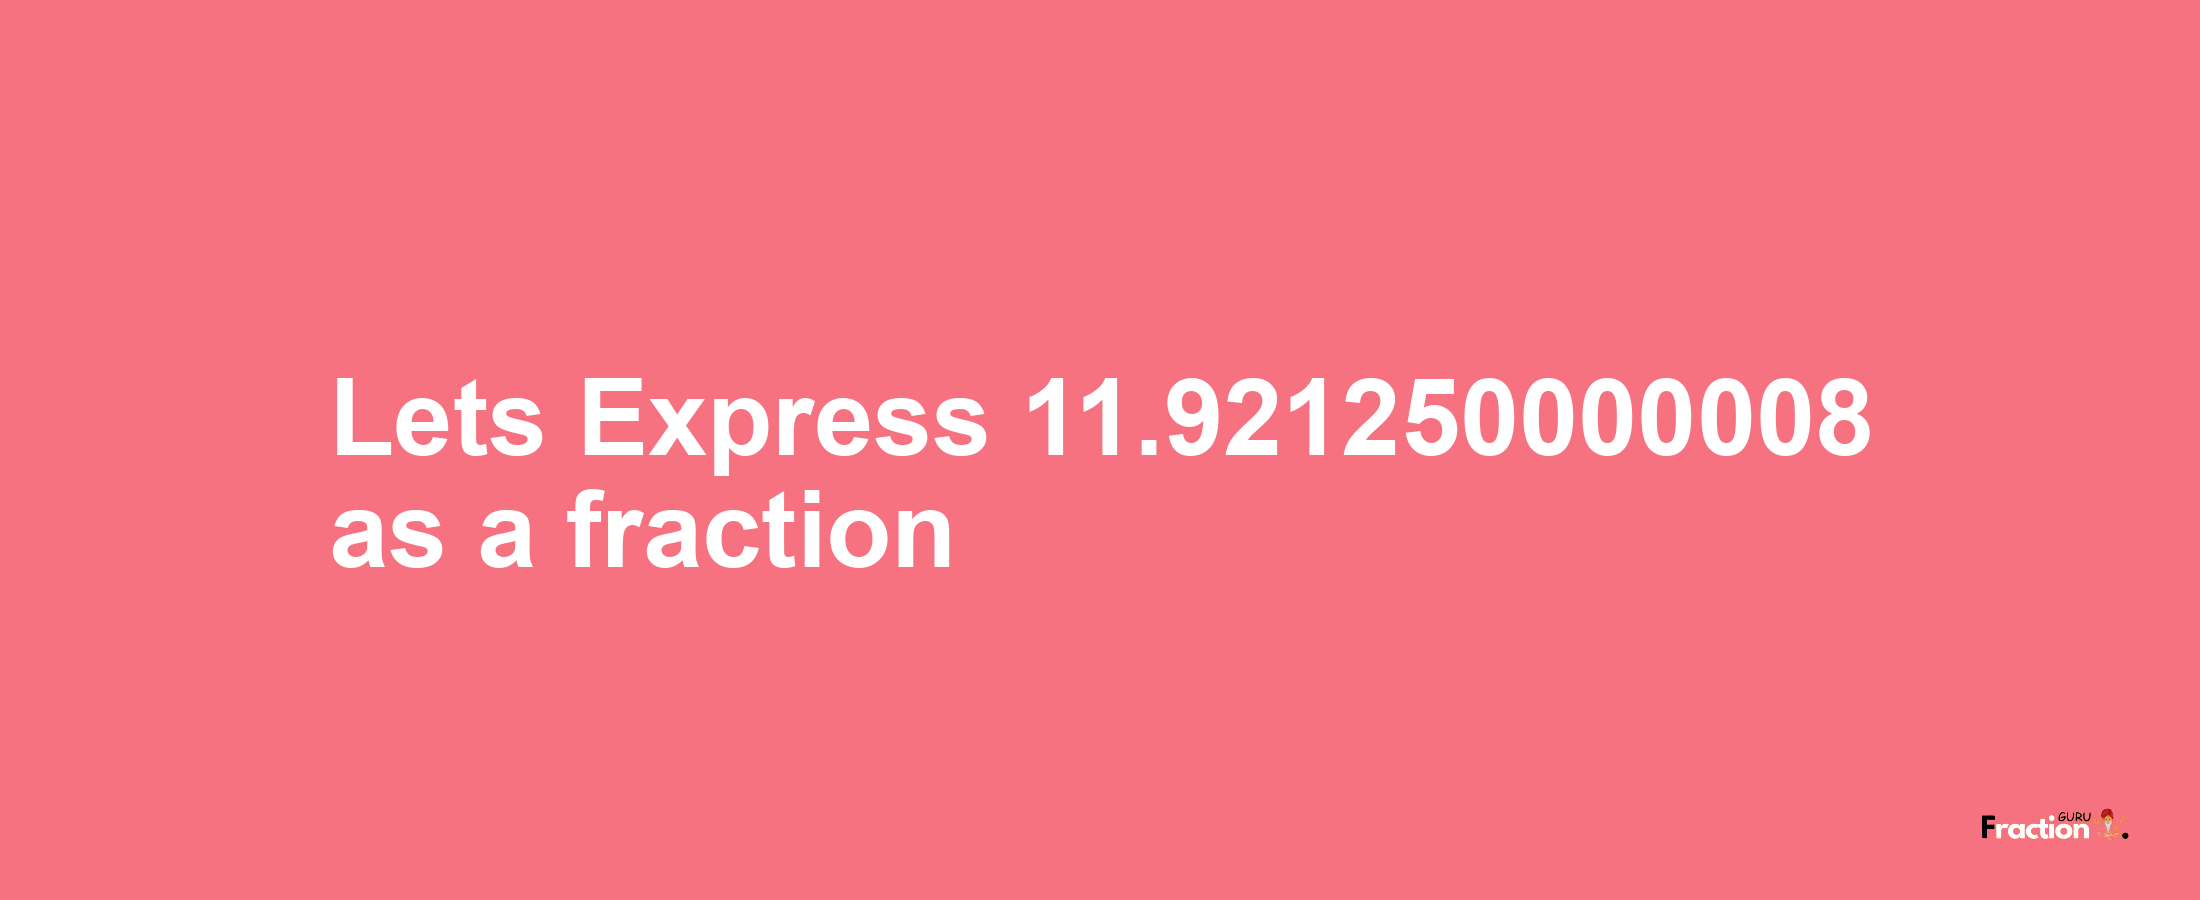 Lets Express 11.921250000008 as afraction